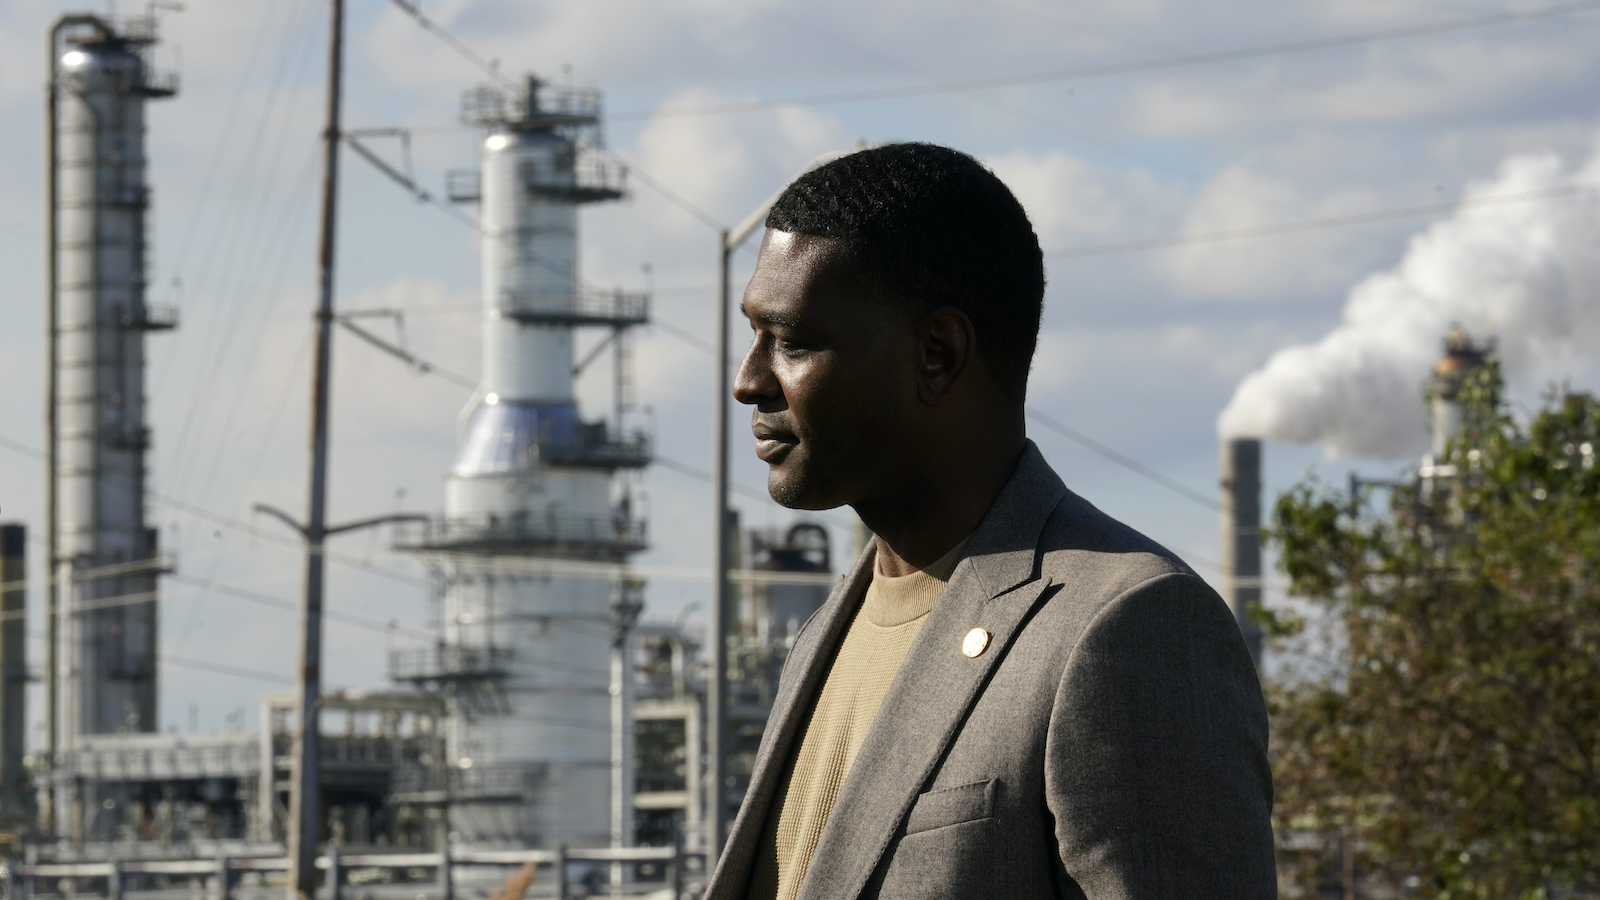 A man in a suit stands in front of industrial plant